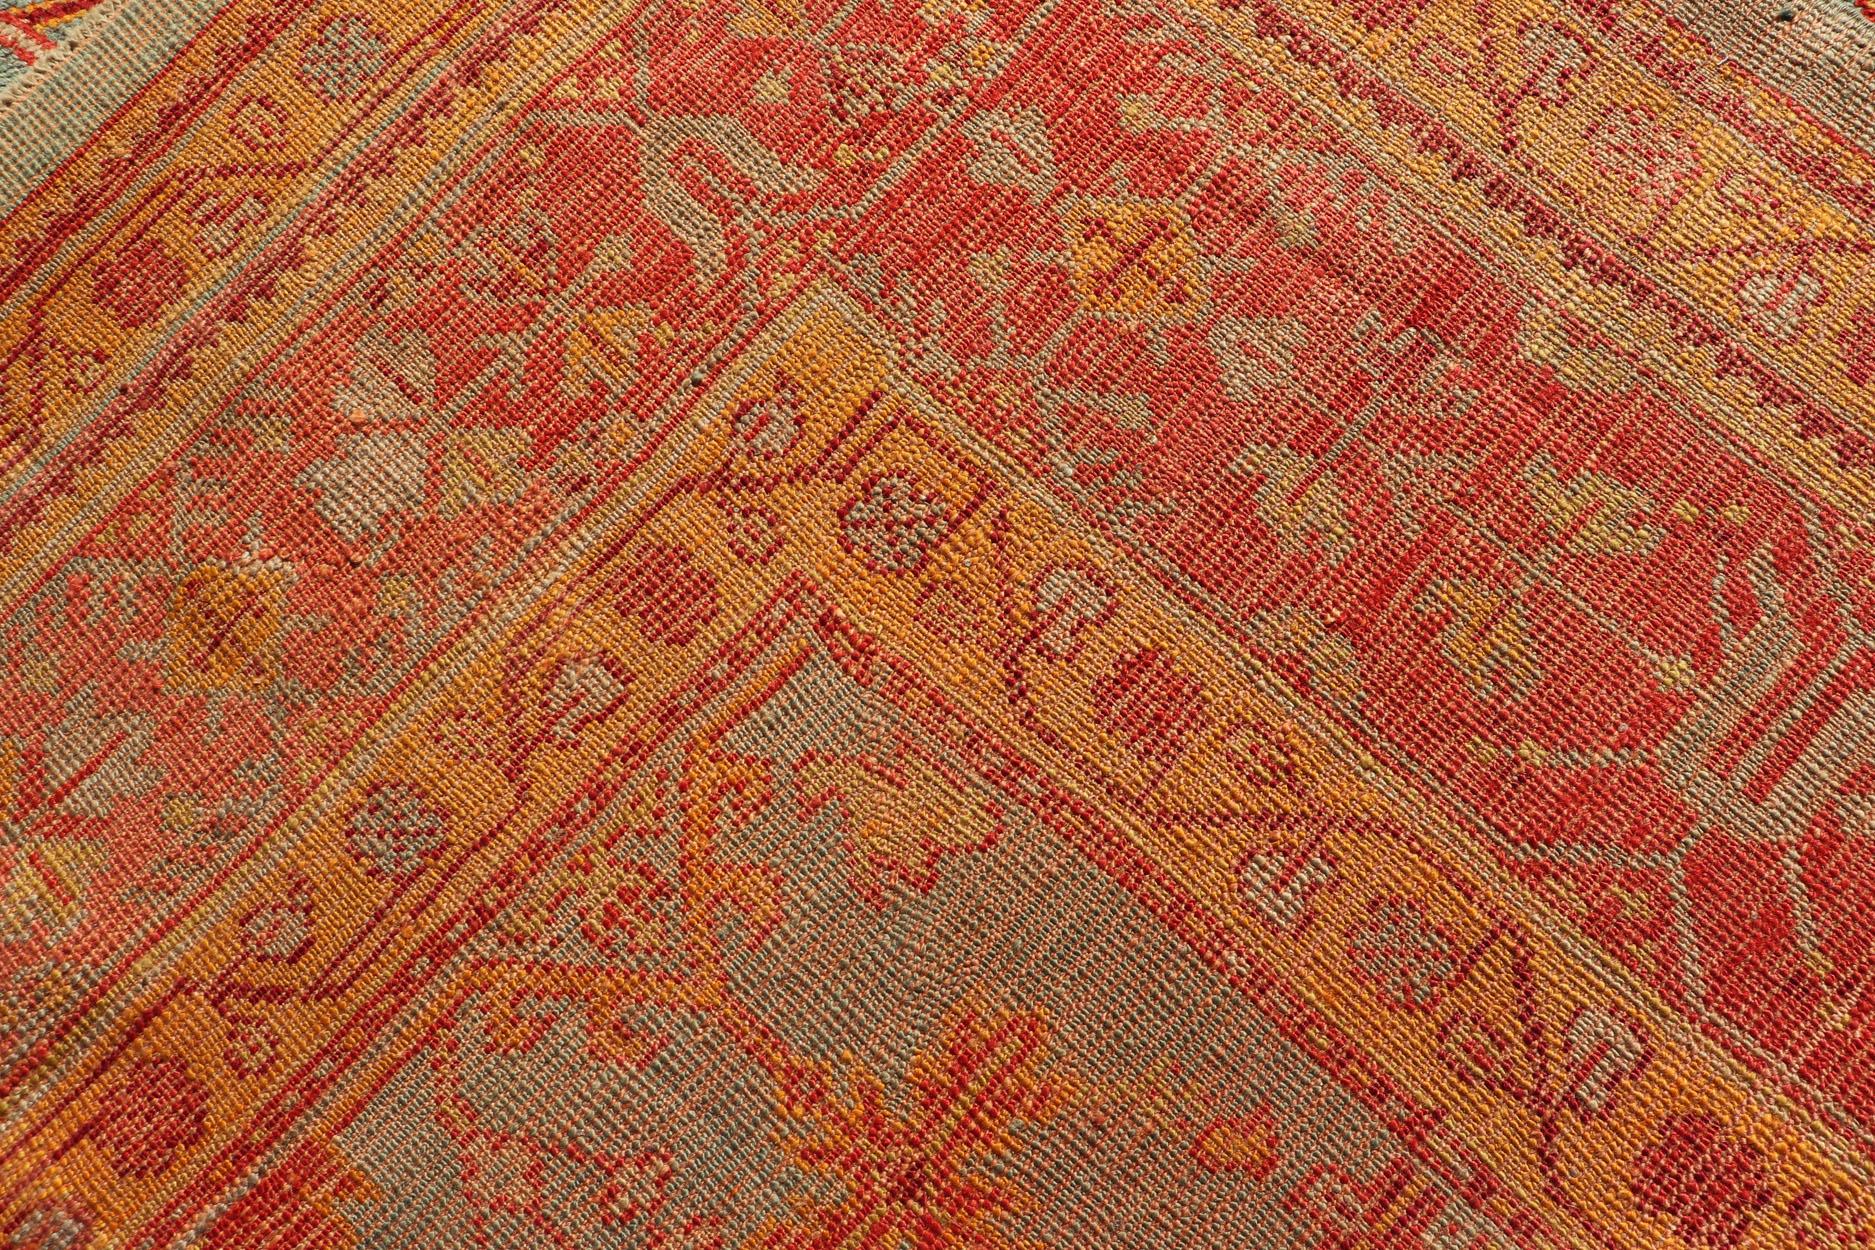 Early 20th century antique Turkish Oushak rug with flowers and geometric motifs in blue background and red border. Keivan Woven Arts / rug L11-0404, country of origin / type: Turkey / Oushak, circa 1910

Produced in early 20th century Turkey, this